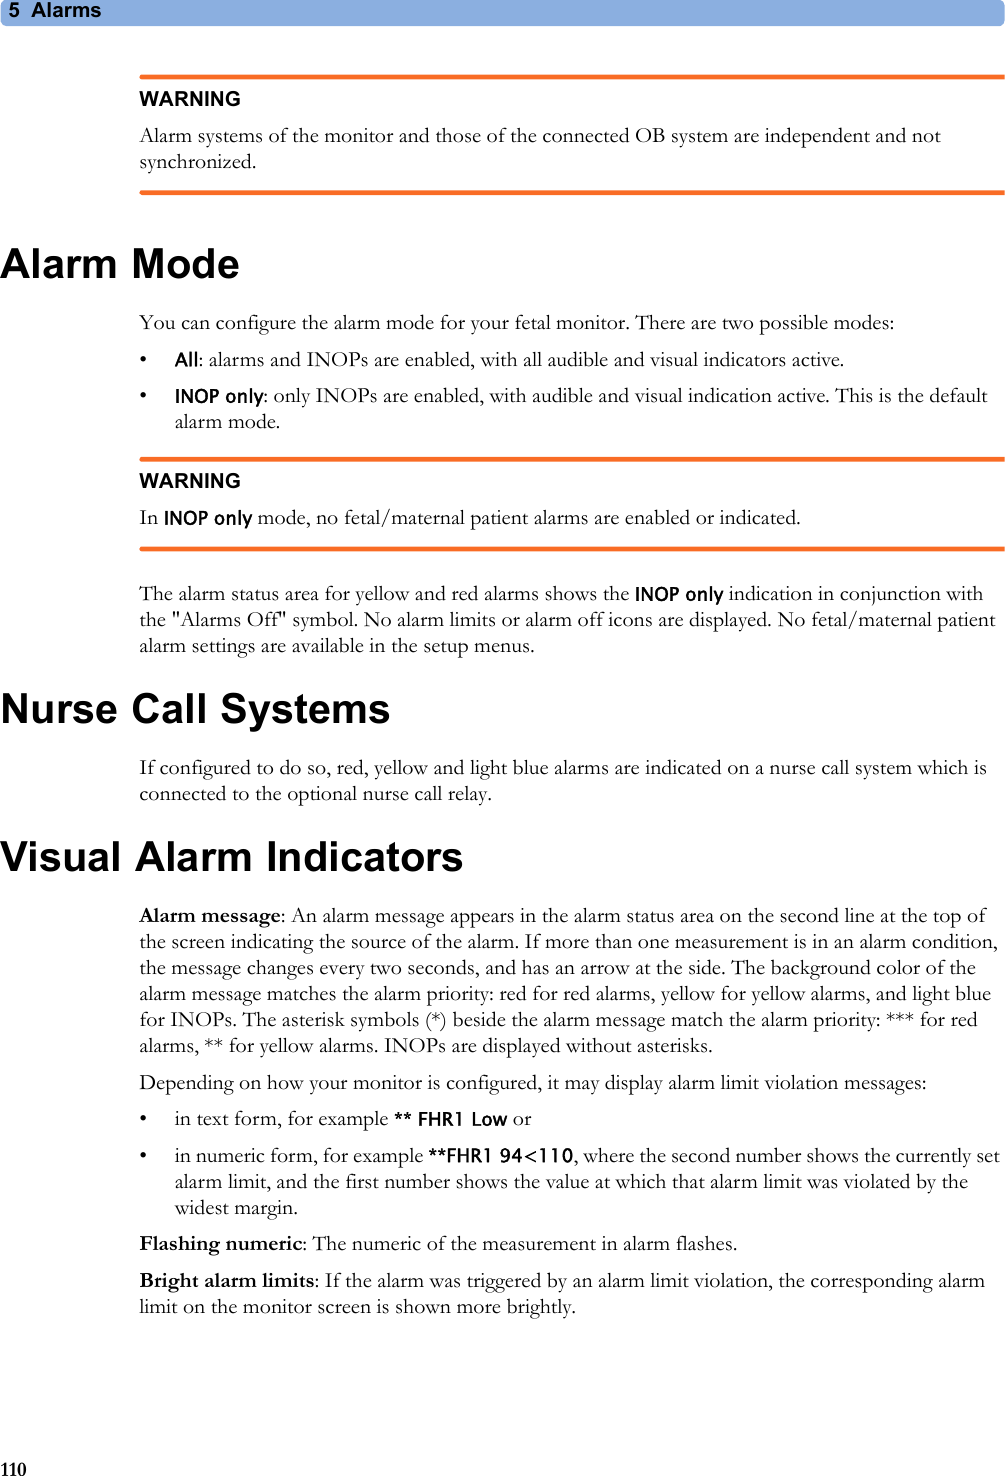 5 Alarms110WARNINGAlarm systems of the monitor and those of the connected OB system are independent and not synchronized.Alarm ModeYou can configure the alarm mode for your fetal monitor. There are two possible modes:•All: alarms and INOPs are enabled, with all audible and visual indicators active.•INOP only: only INOPs are enabled, with audible and visual indication active. This is the default alarm mode.WARNINGIn INOP only mode, no fetal/maternal patient alarms are enabled or indicated.The alarm status area for yellow and red alarms shows the INOP only indication in conjunction with the &quot;Alarms Off&quot; symbol. No alarm limits or alarm off icons are displayed. No fetal/maternal patient alarm settings are available in the setup menus.Nurse Call SystemsIf configured to do so, red, yellow and light blue alarms are indicated on a nurse call system which is connected to the optional nurse call relay. Visual Alarm IndicatorsAlarm message: An alarm message appears in the alarm status area on the second line at the top of the screen indicating the source of the alarm. If more than one measurement is in an alarm condition, the message changes every two seconds, and has an arrow at the side. The background color of the alarm message matches the alarm priority: red for red alarms, yellow for yellow alarms, and light blue for INOPs. The asterisk symbols (*) beside the alarm message match the alarm priority: *** for red alarms, ** for yellow alarms. INOPs are displayed without asterisks.Depending on how your monitor is configured, it may display alarm limit violation messages:• in text form, for example ** FHR1 Low or• in numeric form, for example **FHR1 94&lt;110, where the second number shows the currently set alarm limit, and the first number shows the value at which that alarm limit was violated by the widest margin.Flashing numeric: The numeric of the measurement in alarm flashes.Bright alarm limits: If the alarm was triggered by an alarm limit violation, the corresponding alarm limit on the monitor screen is shown more brightly.